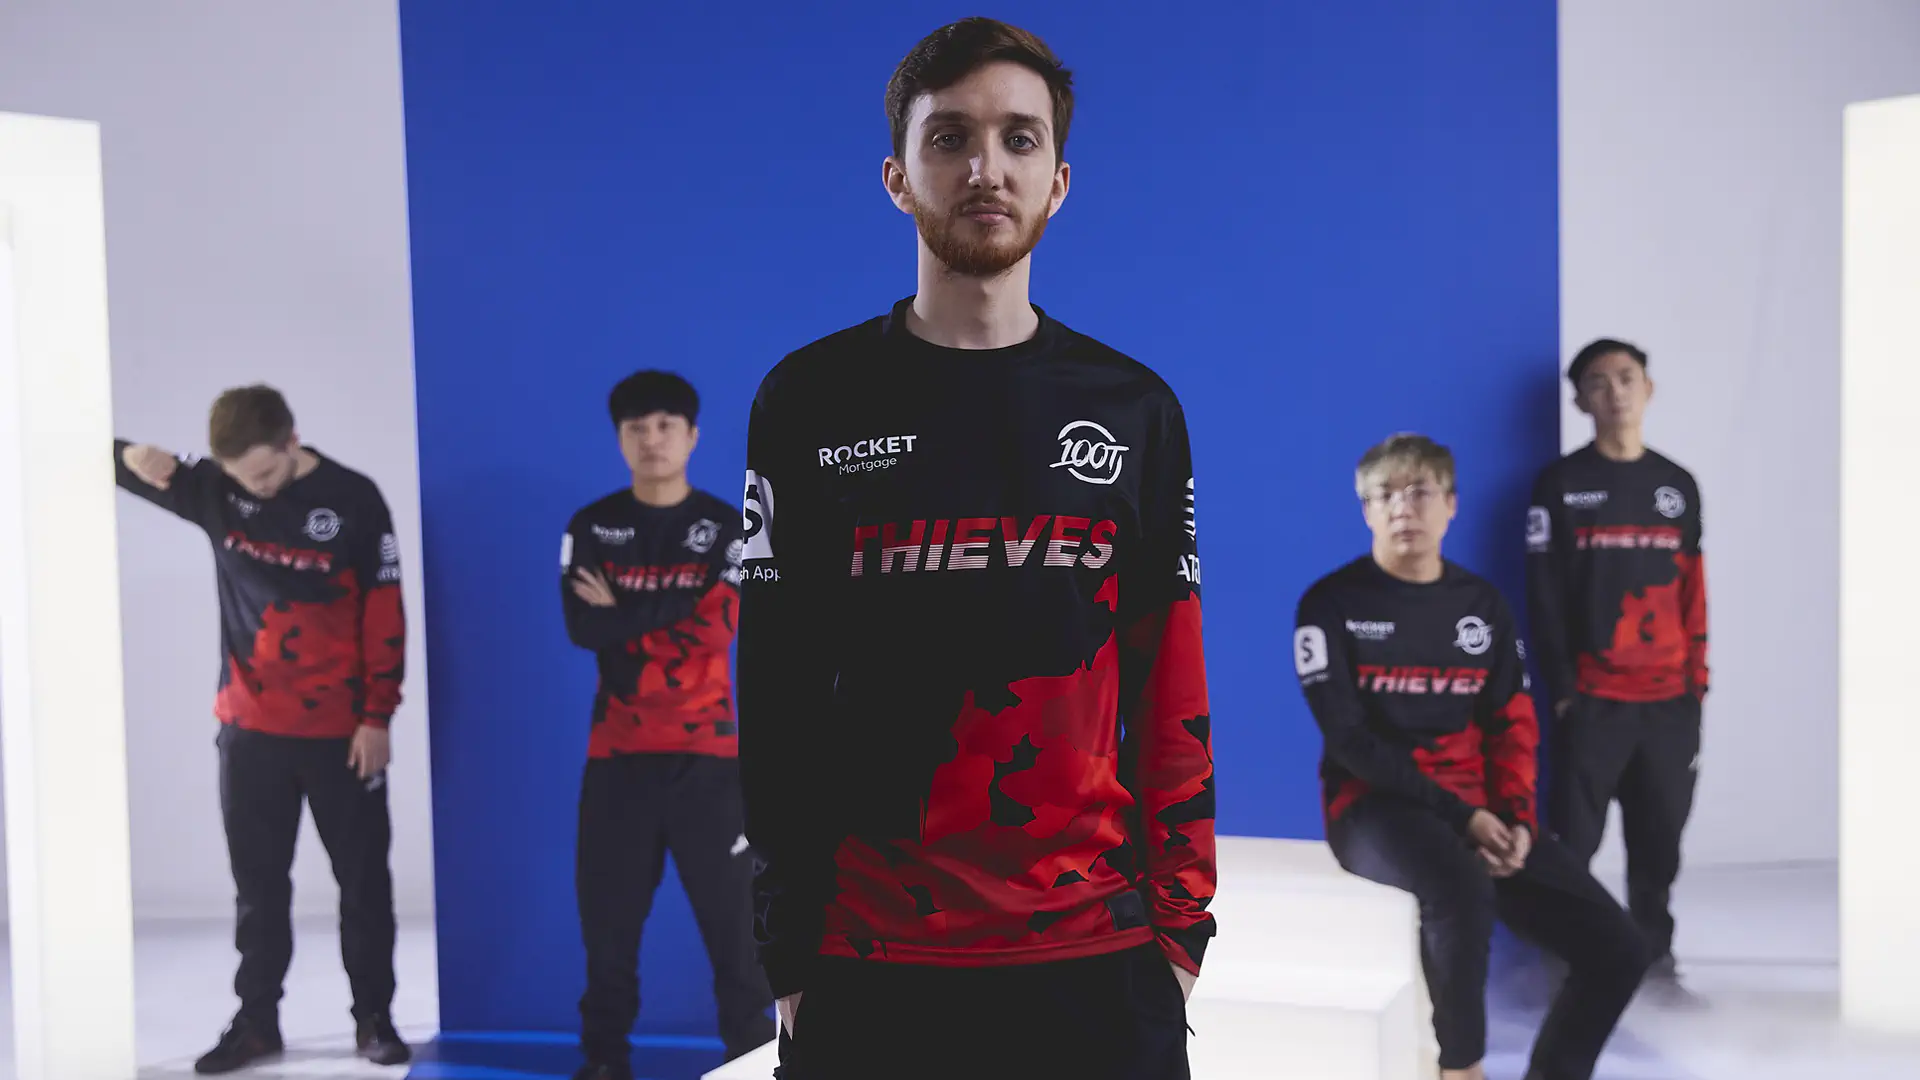 100 thieves owners